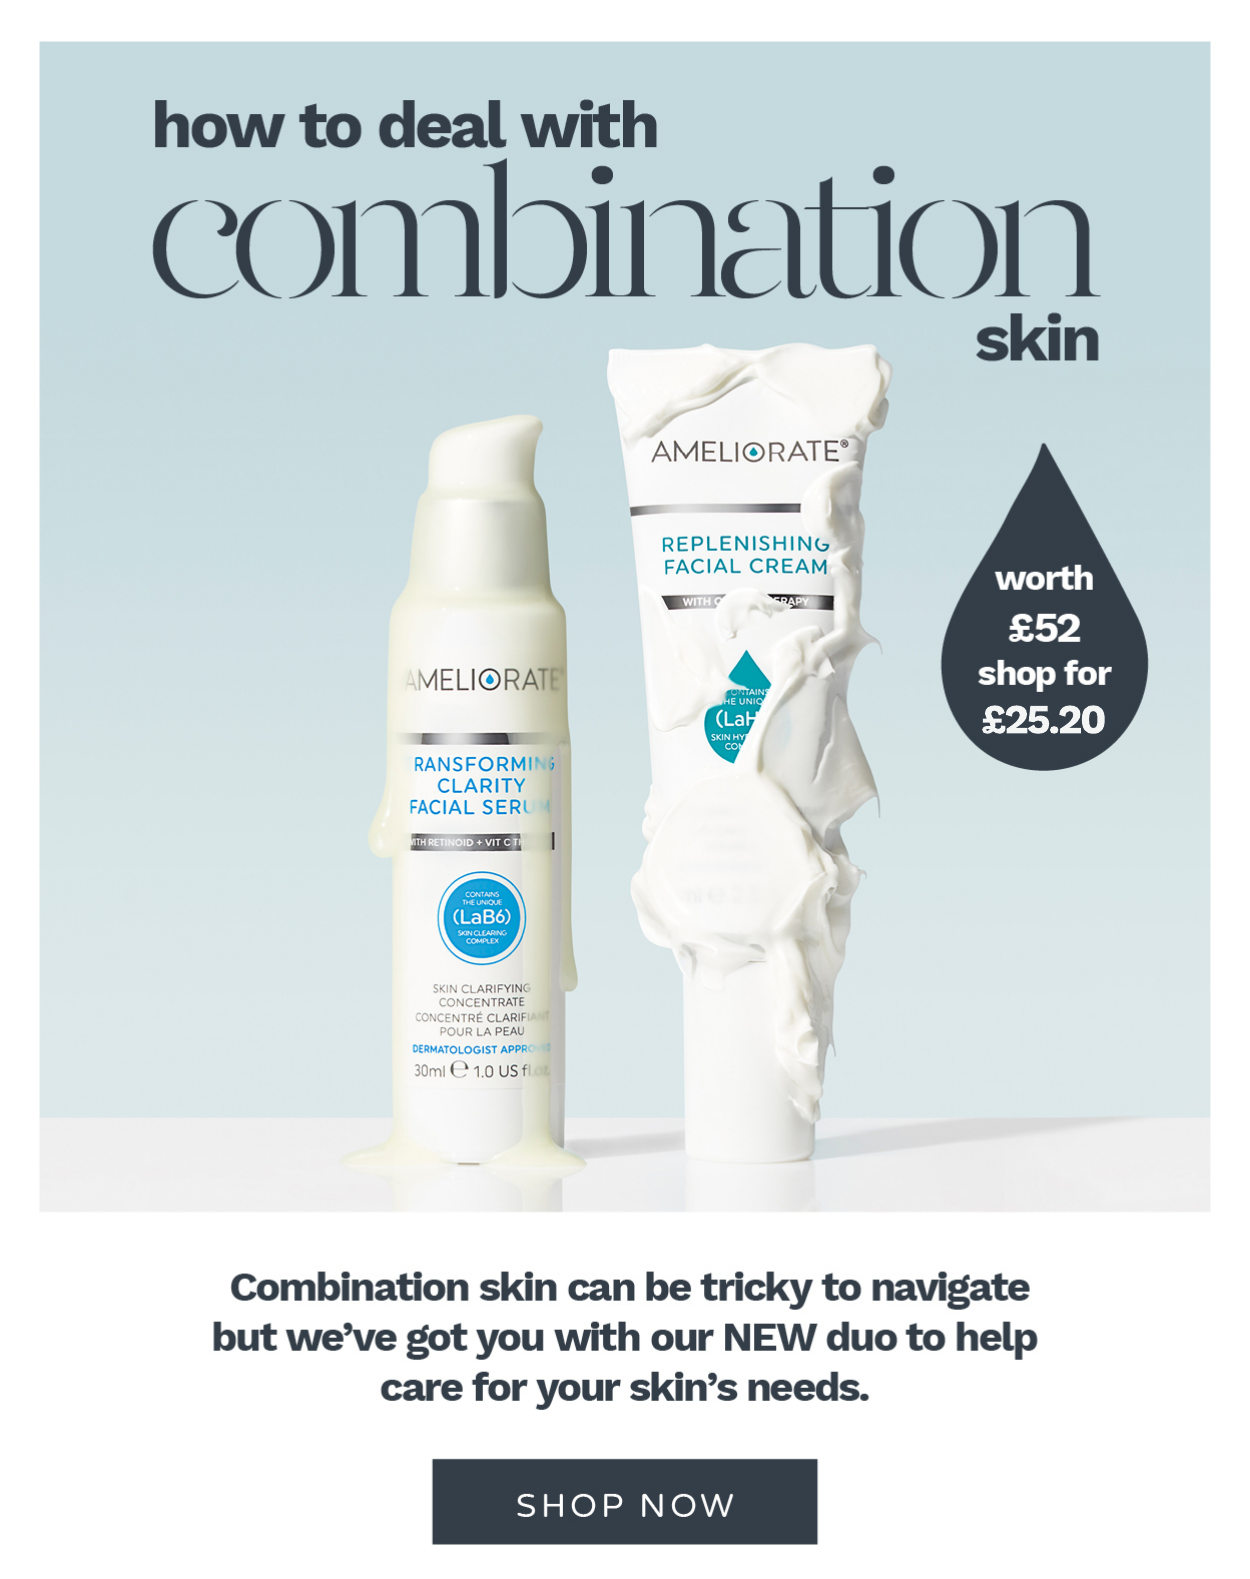 See how our new bundle can help with combination skin